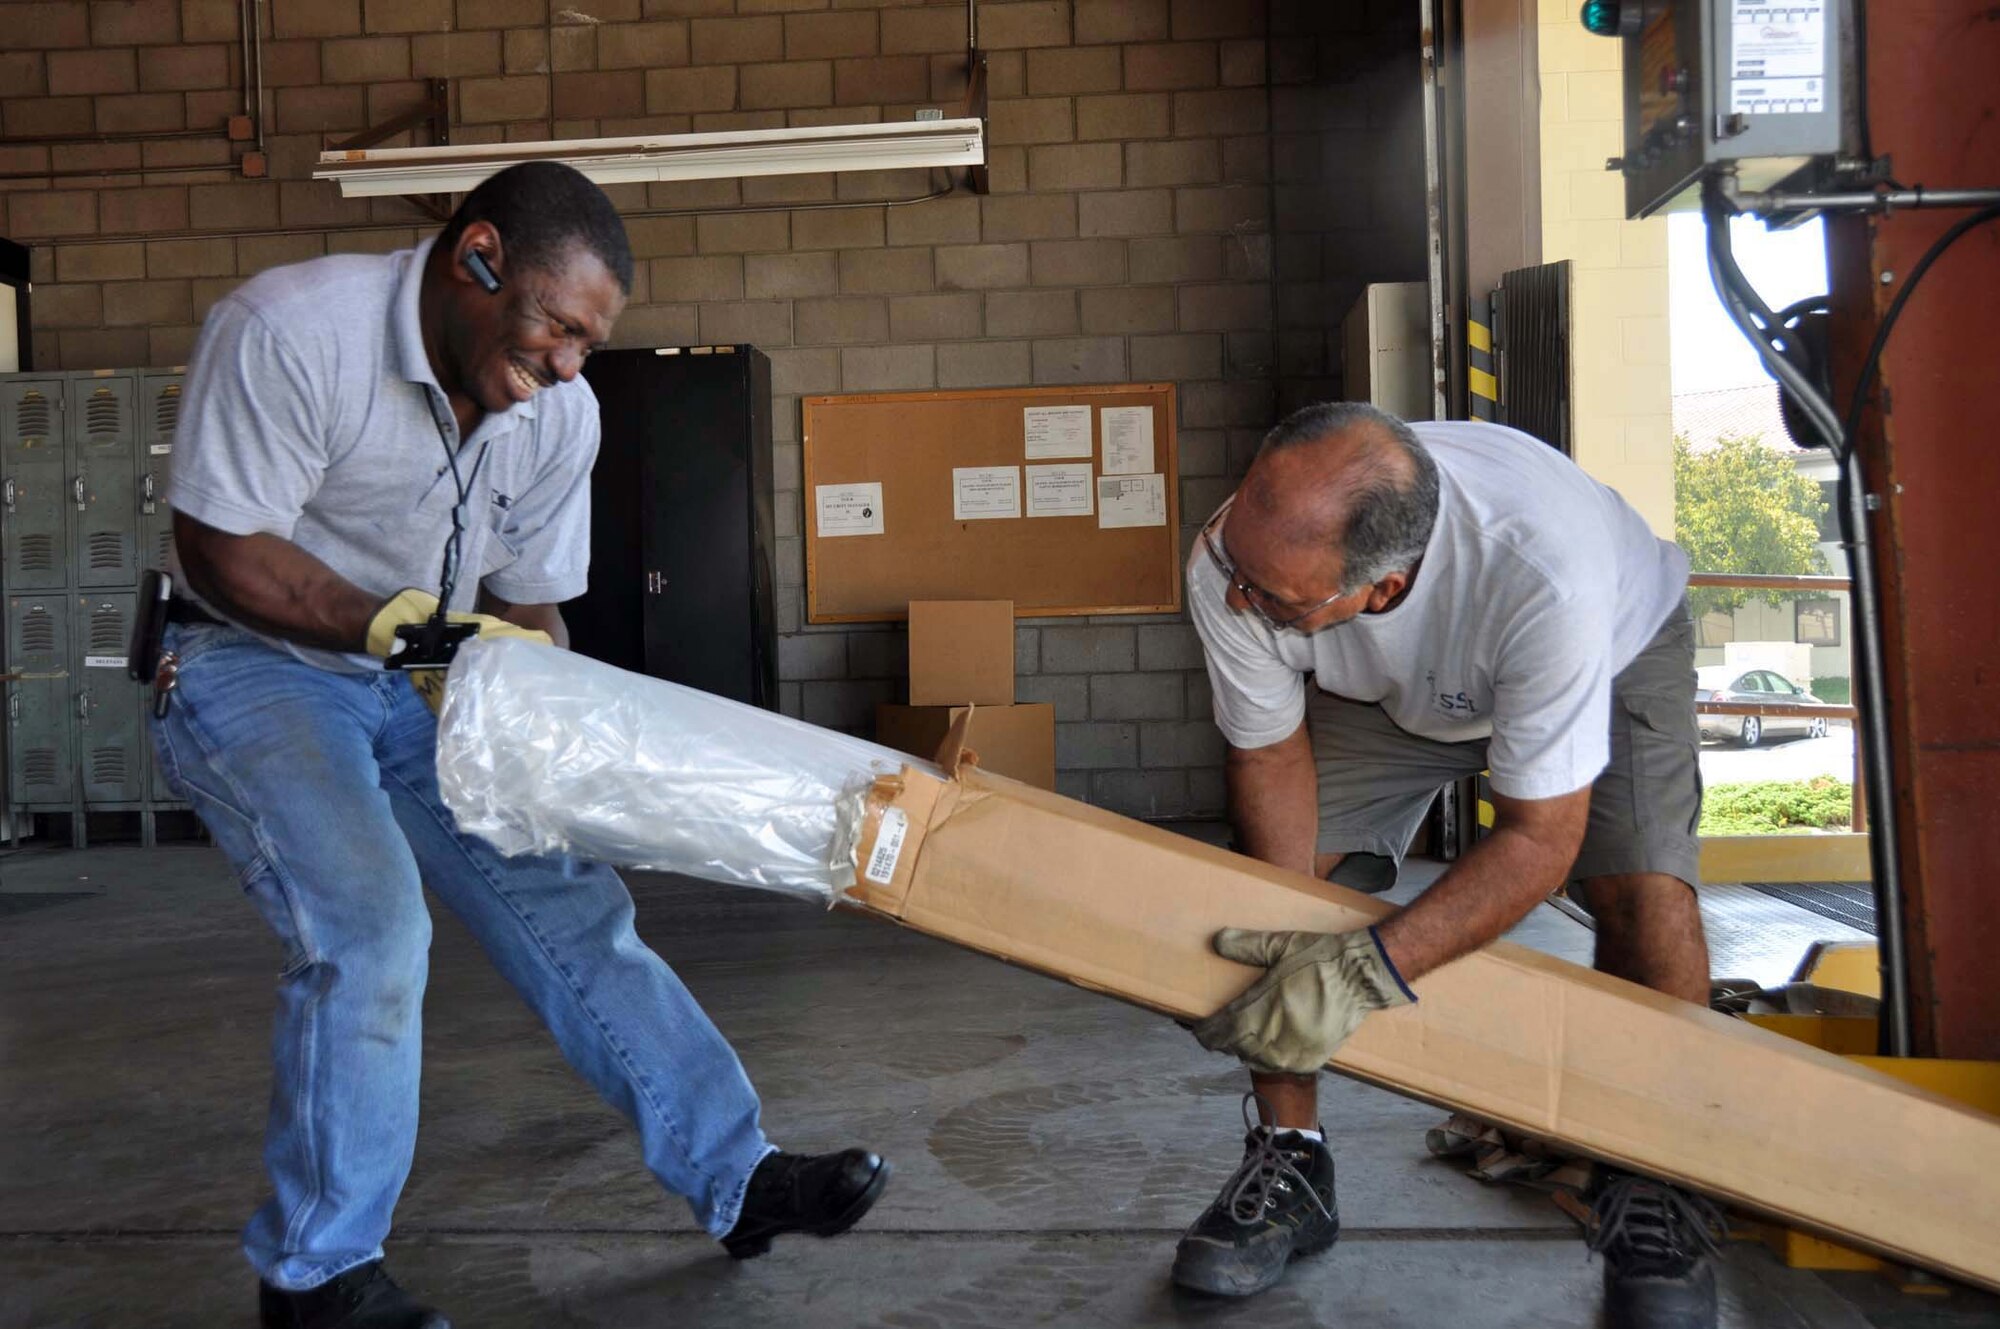 Willy Alexander and Rudy Trejo, Satellite Services, Inc., open a plastic pallet cover September 28, 2011, to prepare pallets of humanitarian supplies  for shipment to Kabul, Afghanistan.  The 24 skids of humanitarian supplies that arrived at March Air Reserve Base from Women of Faith in Redlands were redistributed and secured onto pallets prior to their October 2nd departure on a 452nd Air Mobility Wing C-17 Globemaster III as part of the Denton Amendment, a U.S. government program that allows humanitarian cargo to be shipped free of charge via military aircraft on a space available basis.  (U.S. Air Force photo/Linda Welz)Amendment Program.  (U.S. Air Force photo/Linda Welz)